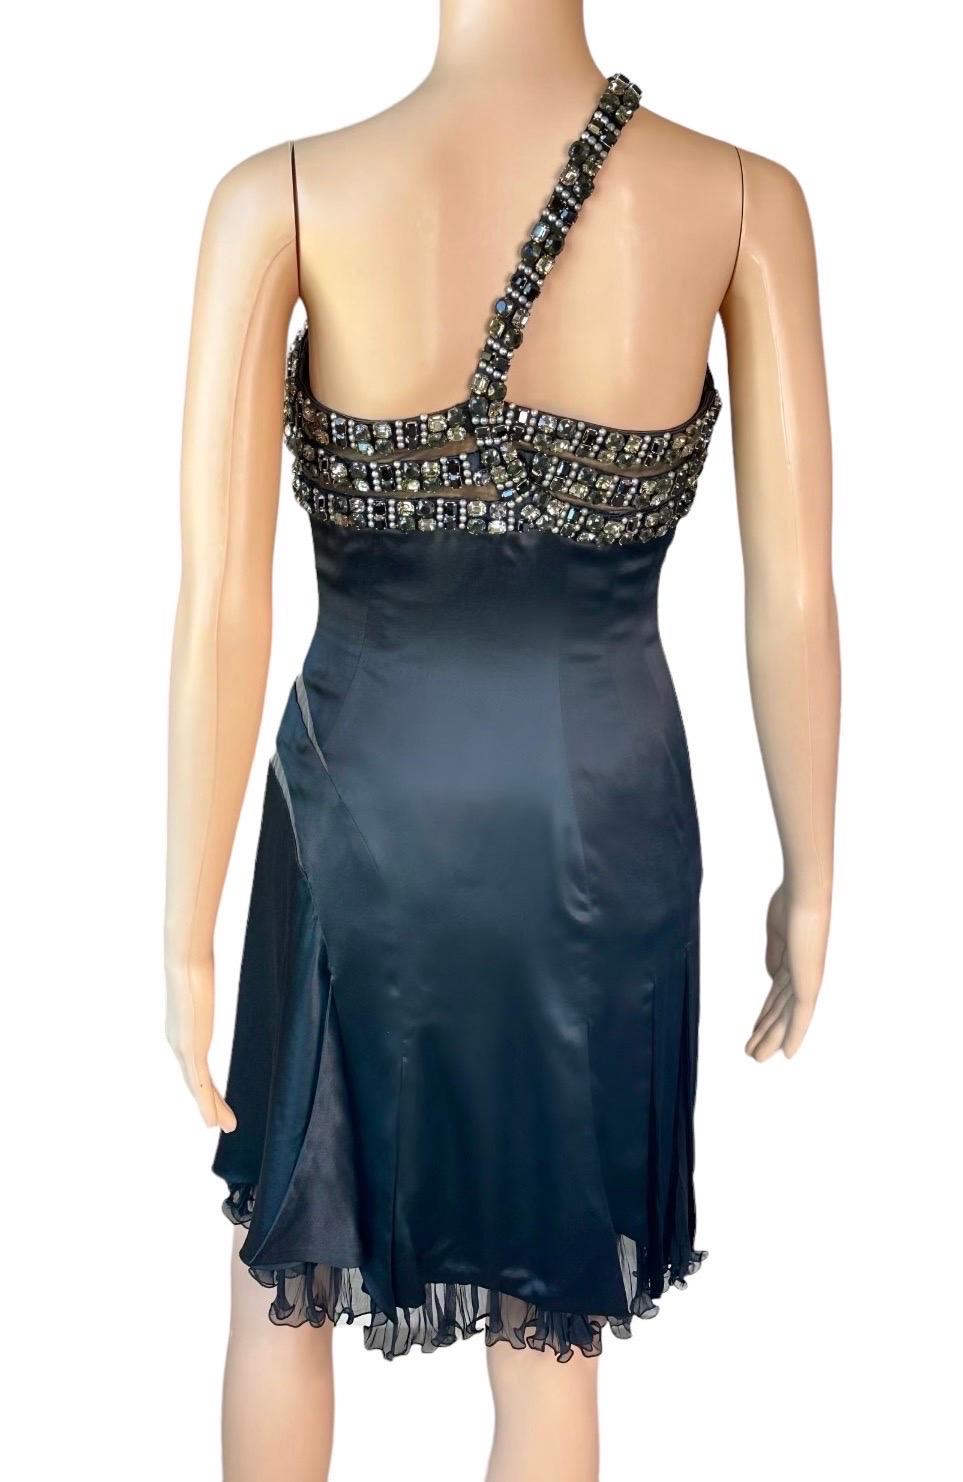 Atelier Versace F/W 2004 Runway Crystal Embellished Black Evening Mini Dress  In Good Condition For Sale In Naples, FL